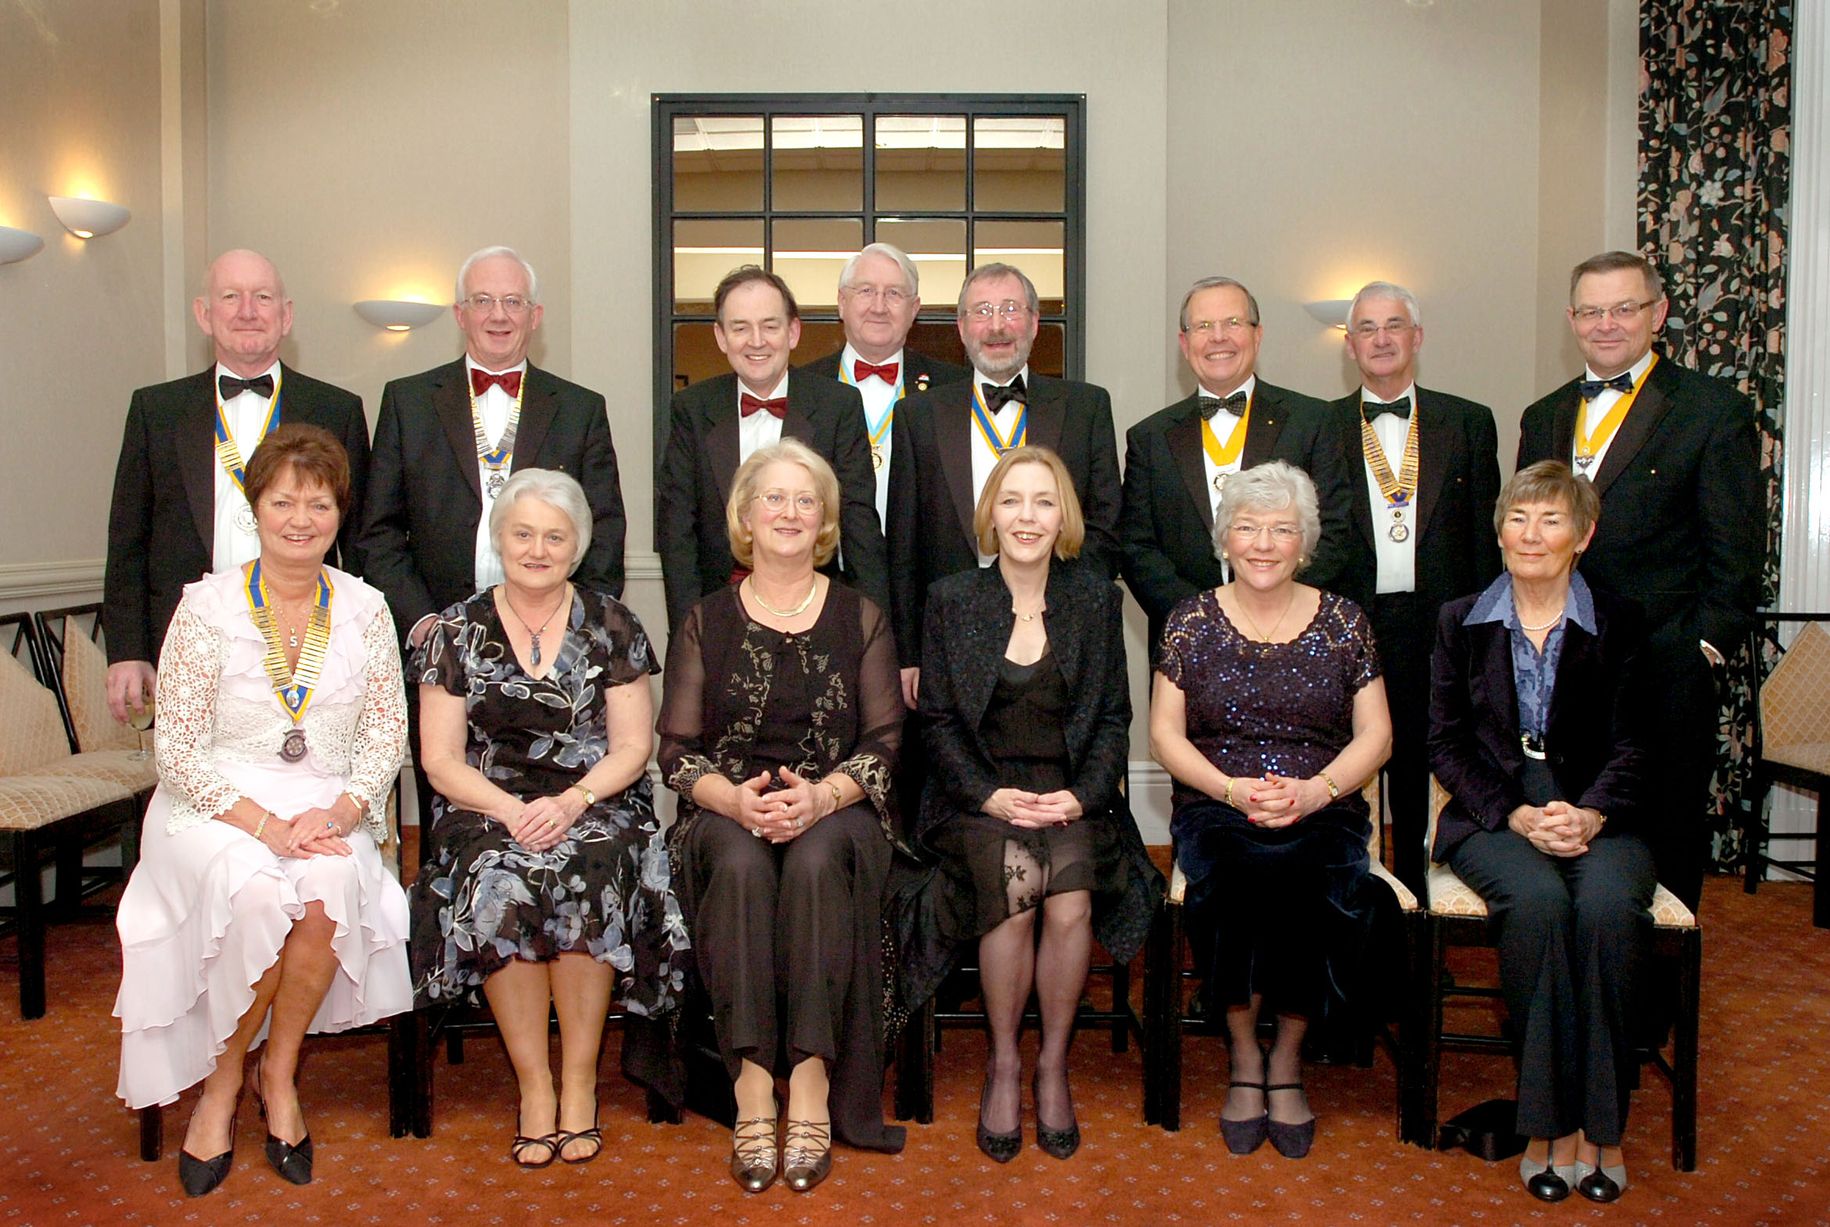 Picture by Gareth Jones 14th Nov 2008 Southport Rotary Club 86th birthday Presidents night at the Royal Clifton Hotel. Pictured is President Roger Wall with his wife Mary, Guest speaker Spencer Leigh with his wife Anne ,Assistant District Govenor Keith Foggin and other distinguished guests